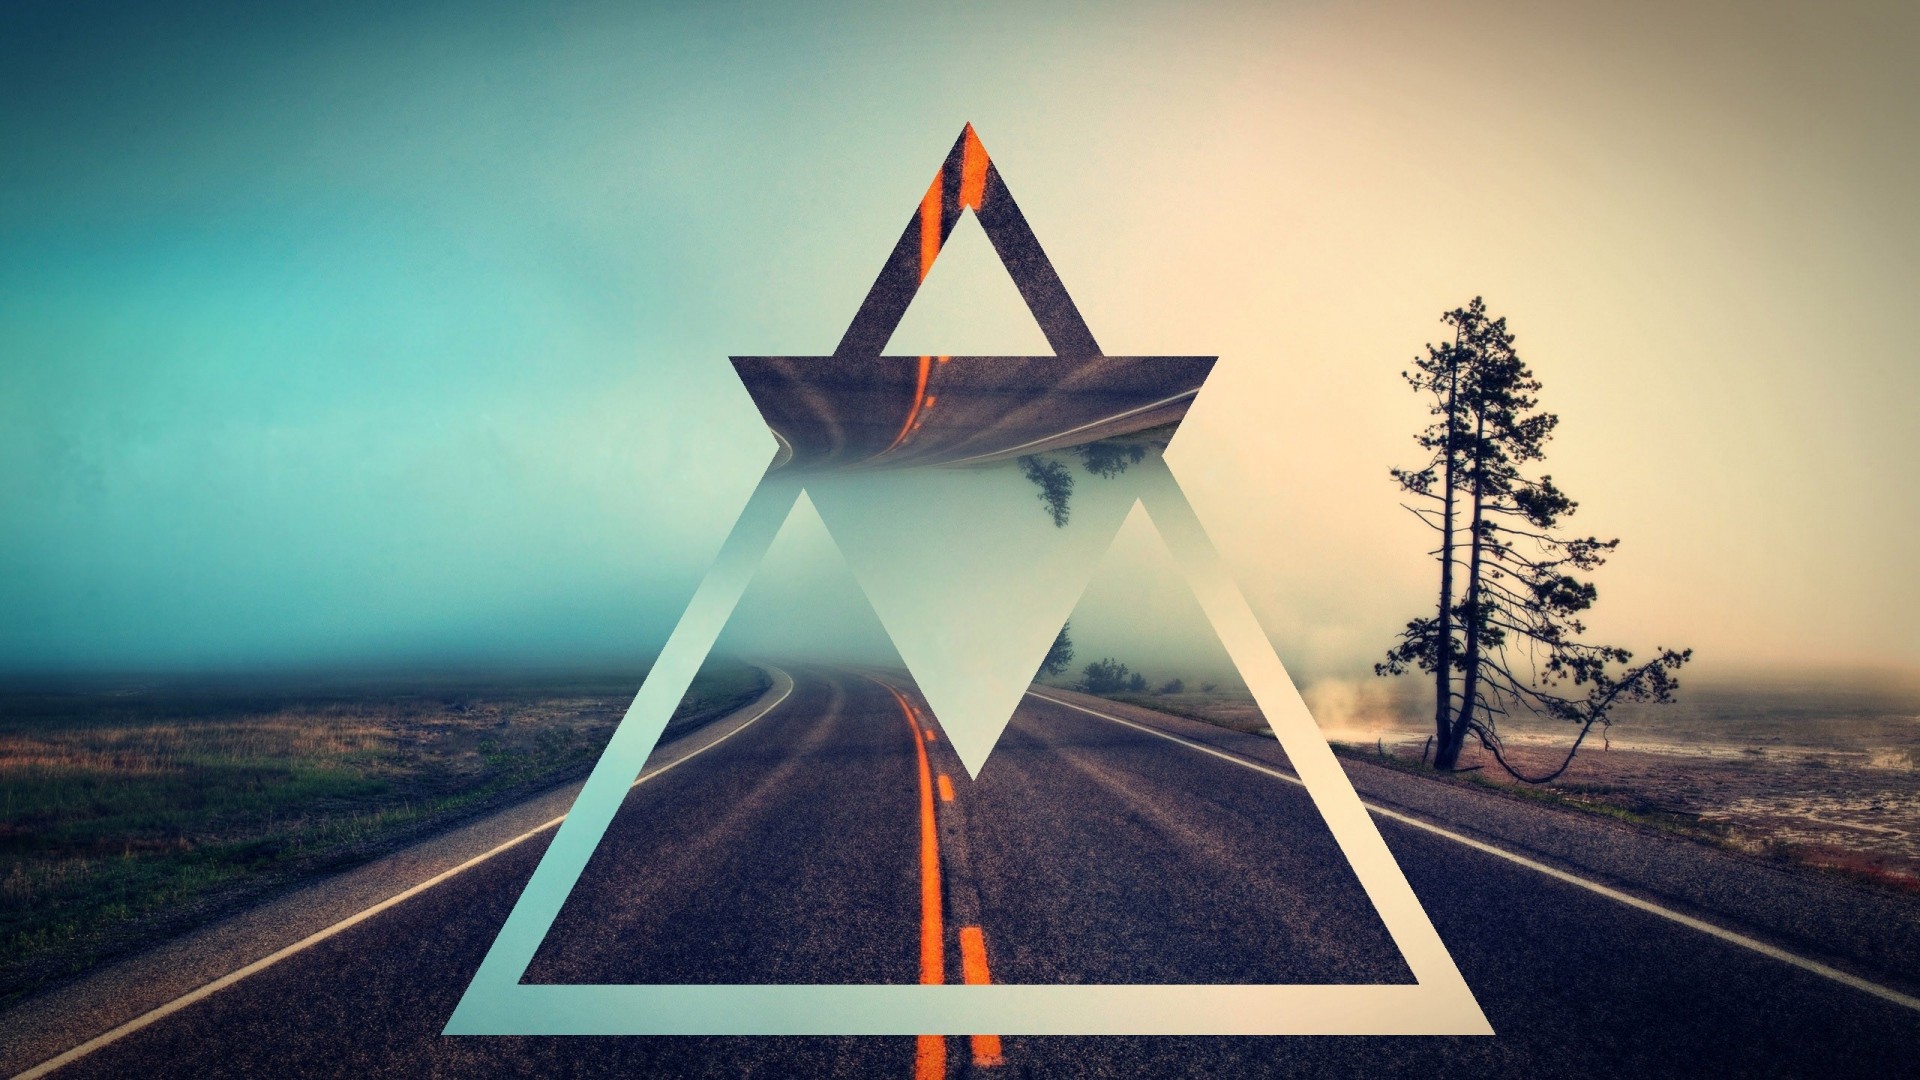 General 1920x1080 polyscape road landscape abstract triangle geometric figures